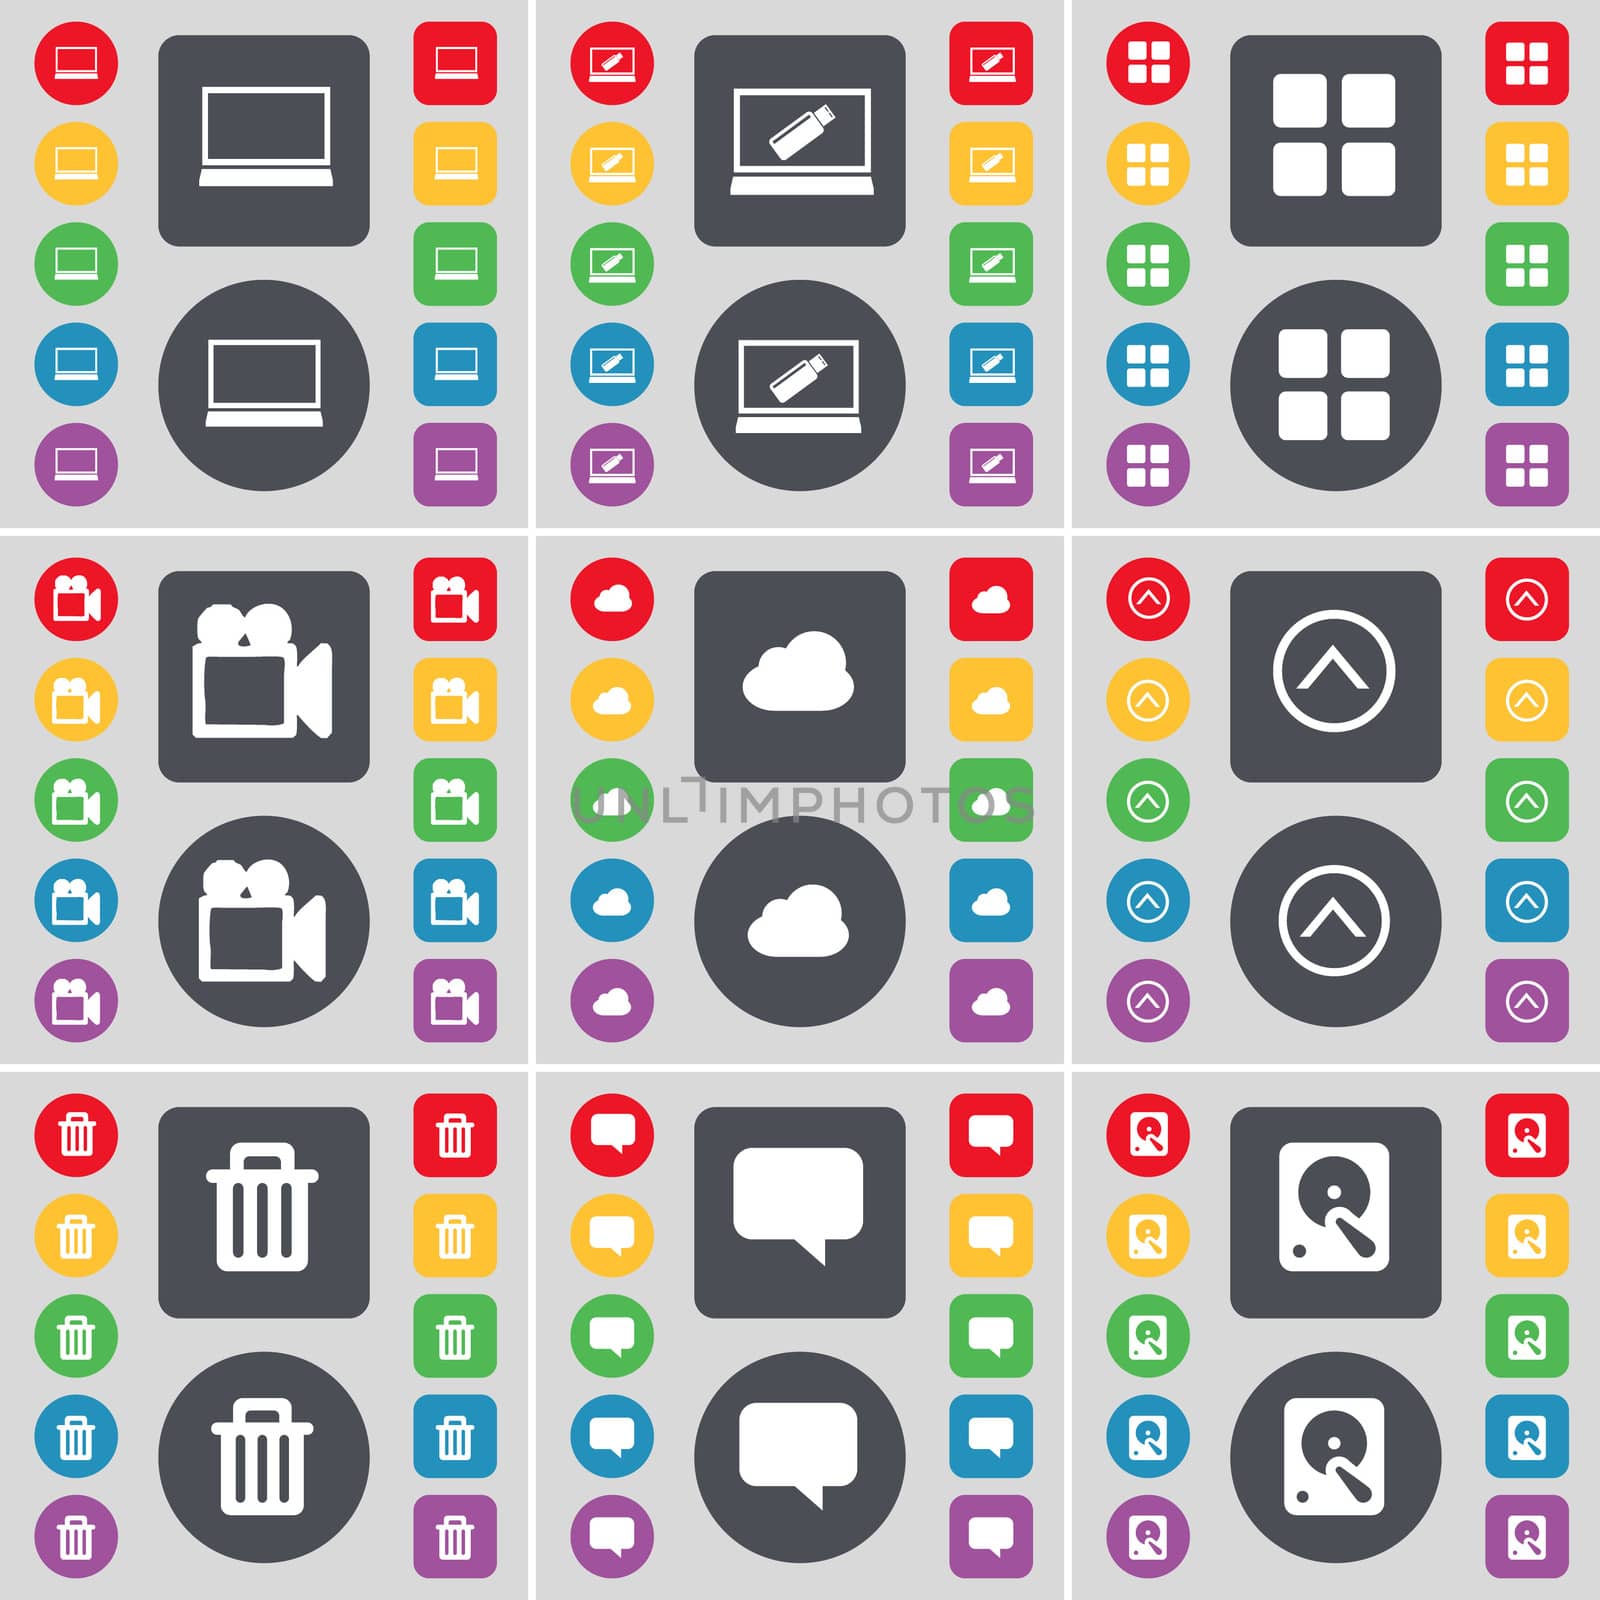 Laptop, Apps, Film camera, Cloud, Arrow up, Trash can, Chat bubble, Hard drive icon symbol. A large set of flat, colored buttons for your design. illustration